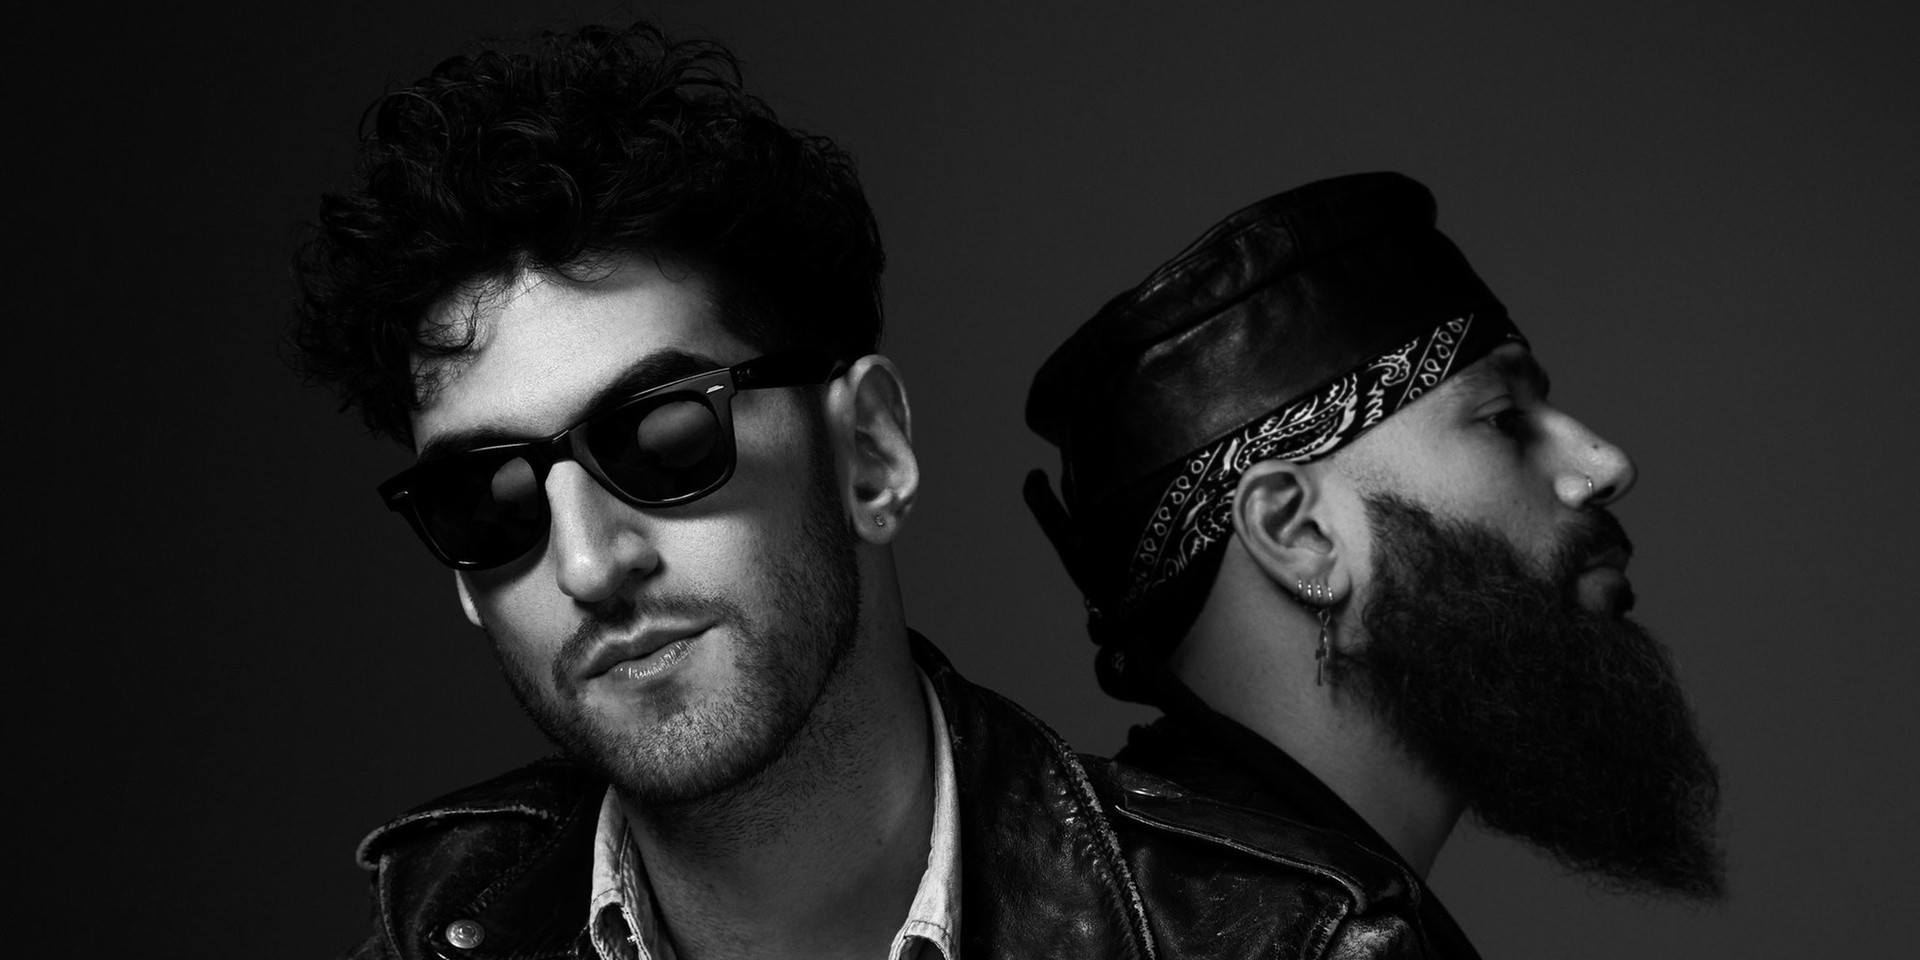 "After over 15 years in the game, we can say we’re a Grammy-nominated band": An interview with Chromeo